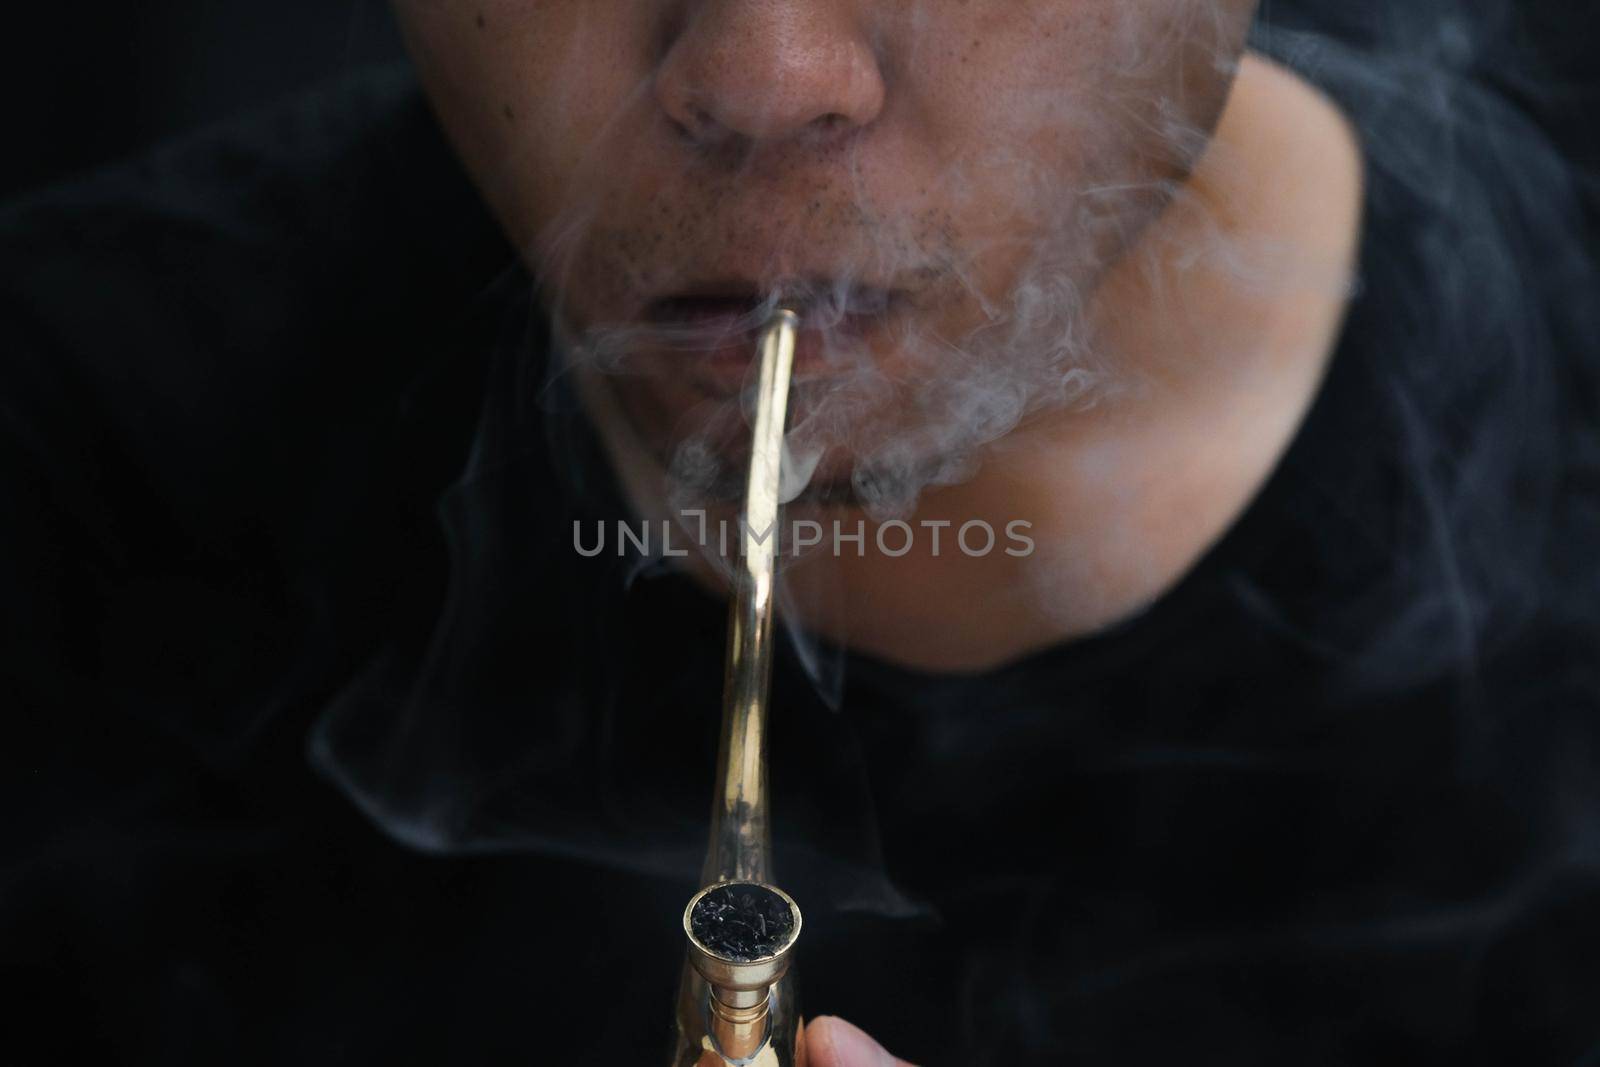 Asian man smokes marijuana from a pipe at home. Studio shoot with model simulating smoking pot with a pipe in a dark background. Cannabis legalisation. by TEERASAK